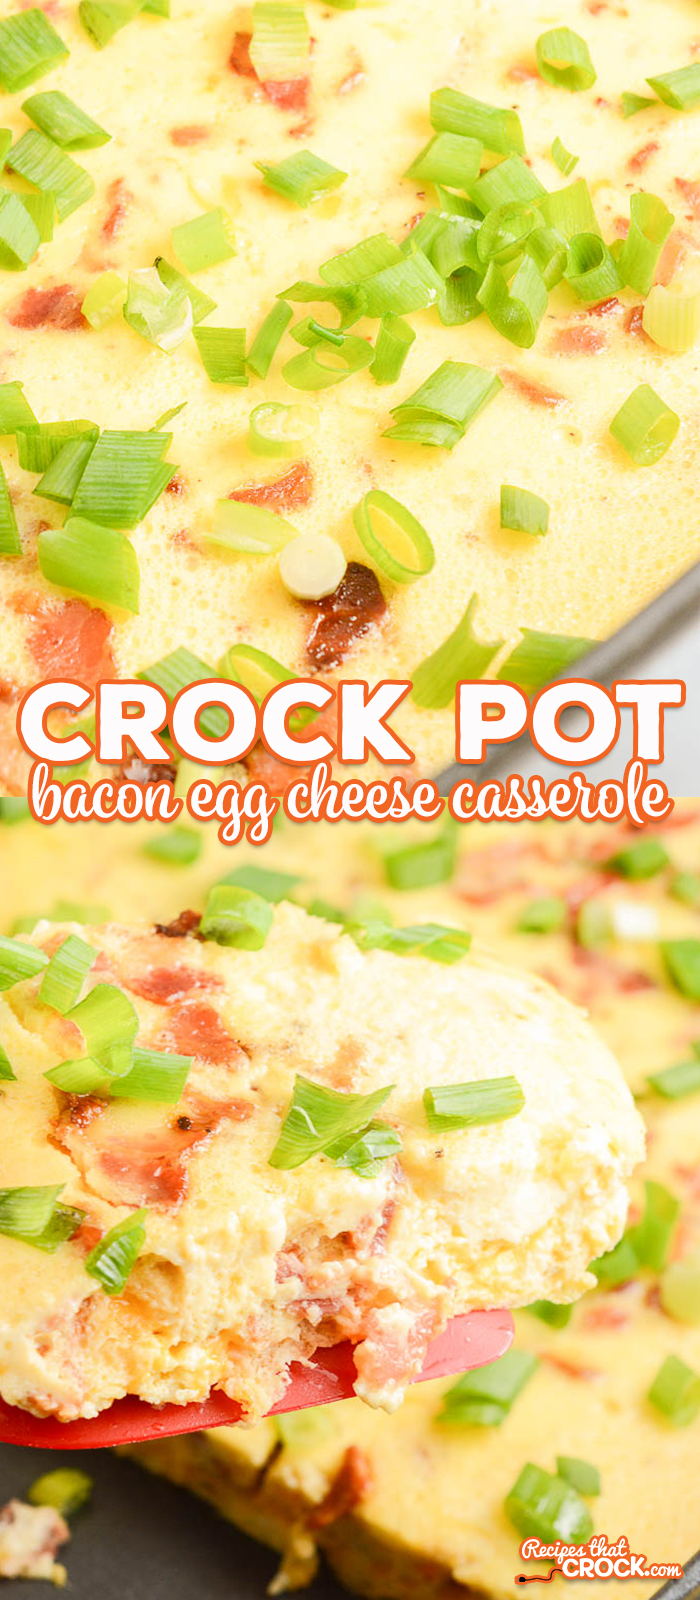 This Crock Pot Bacon Egg Cheese Casserole is a great breakfast that will feed the whole family. Filled with bacon, eggs, and cheese, this breakfast casserole will be sure to fill your family with smiles!